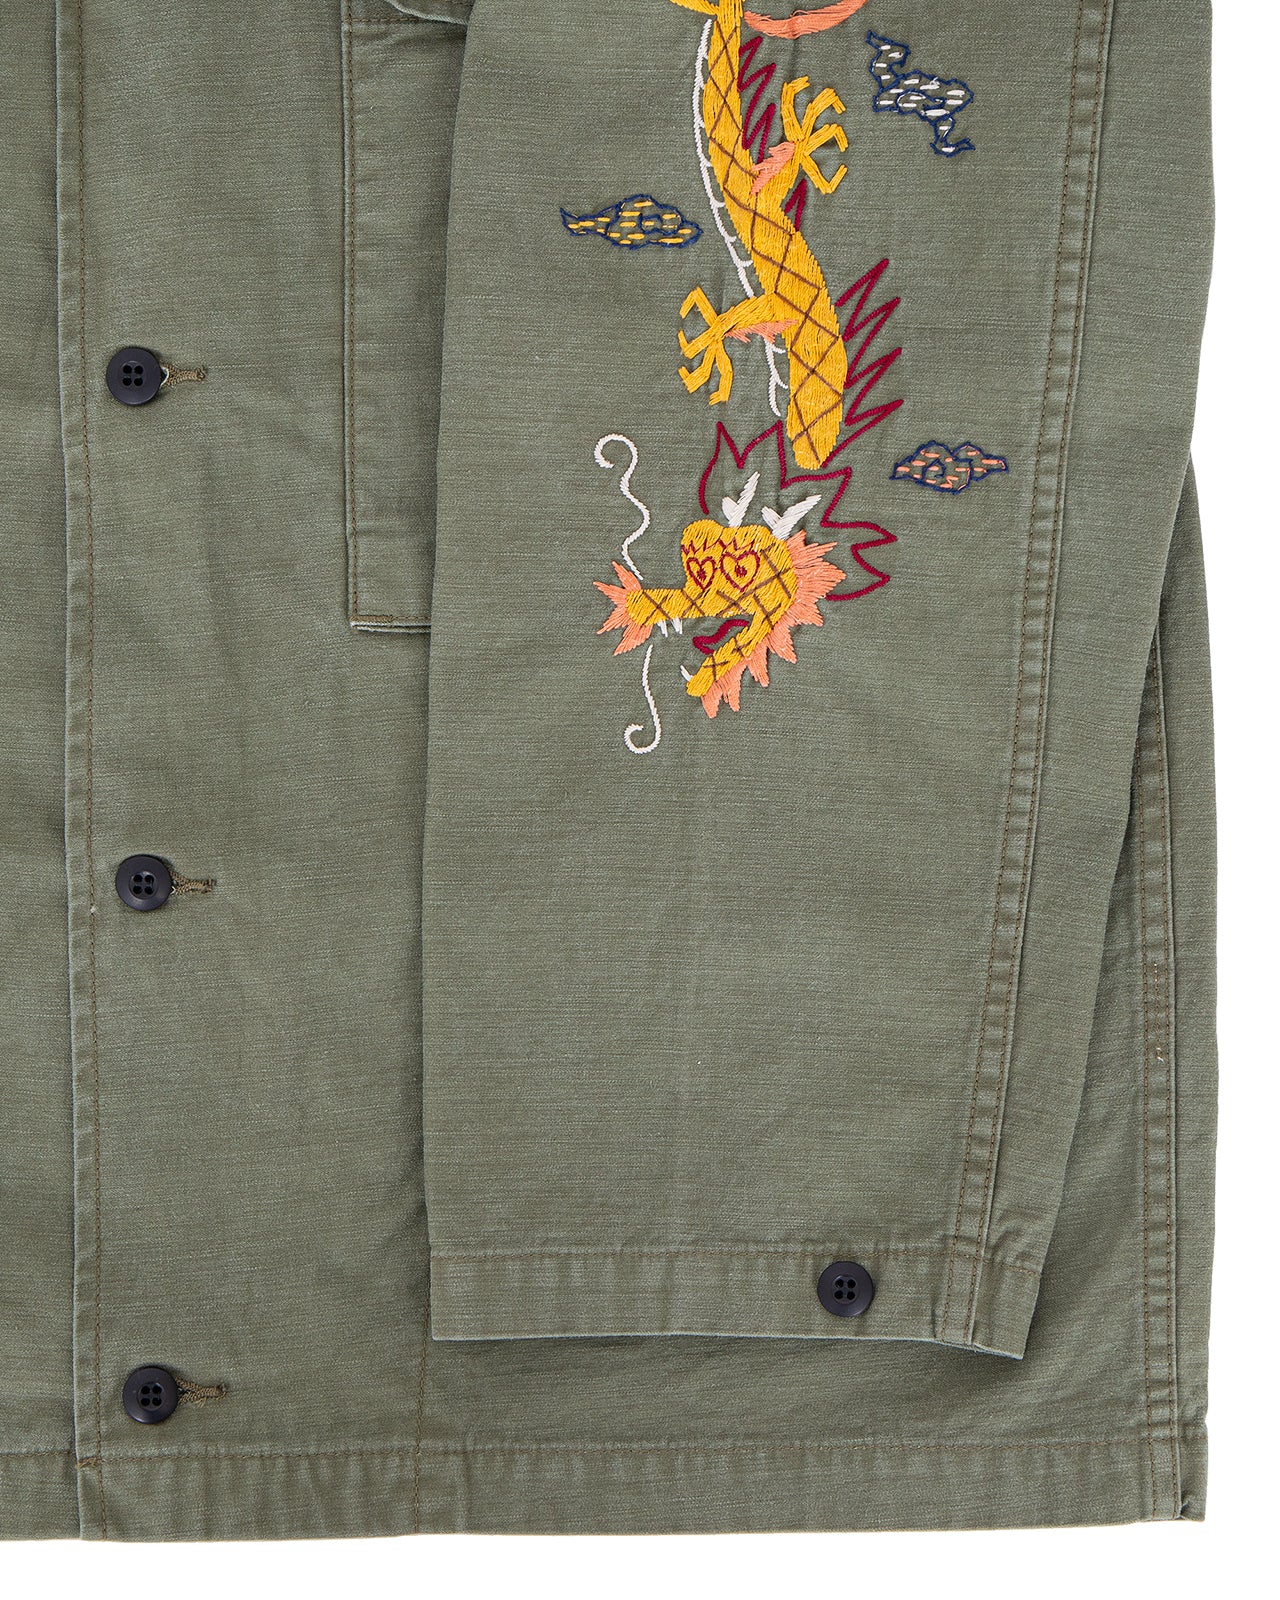 Shop Tom and Jerry Print Denim Jacket with Long Sleeves and Chest Pockets  Online